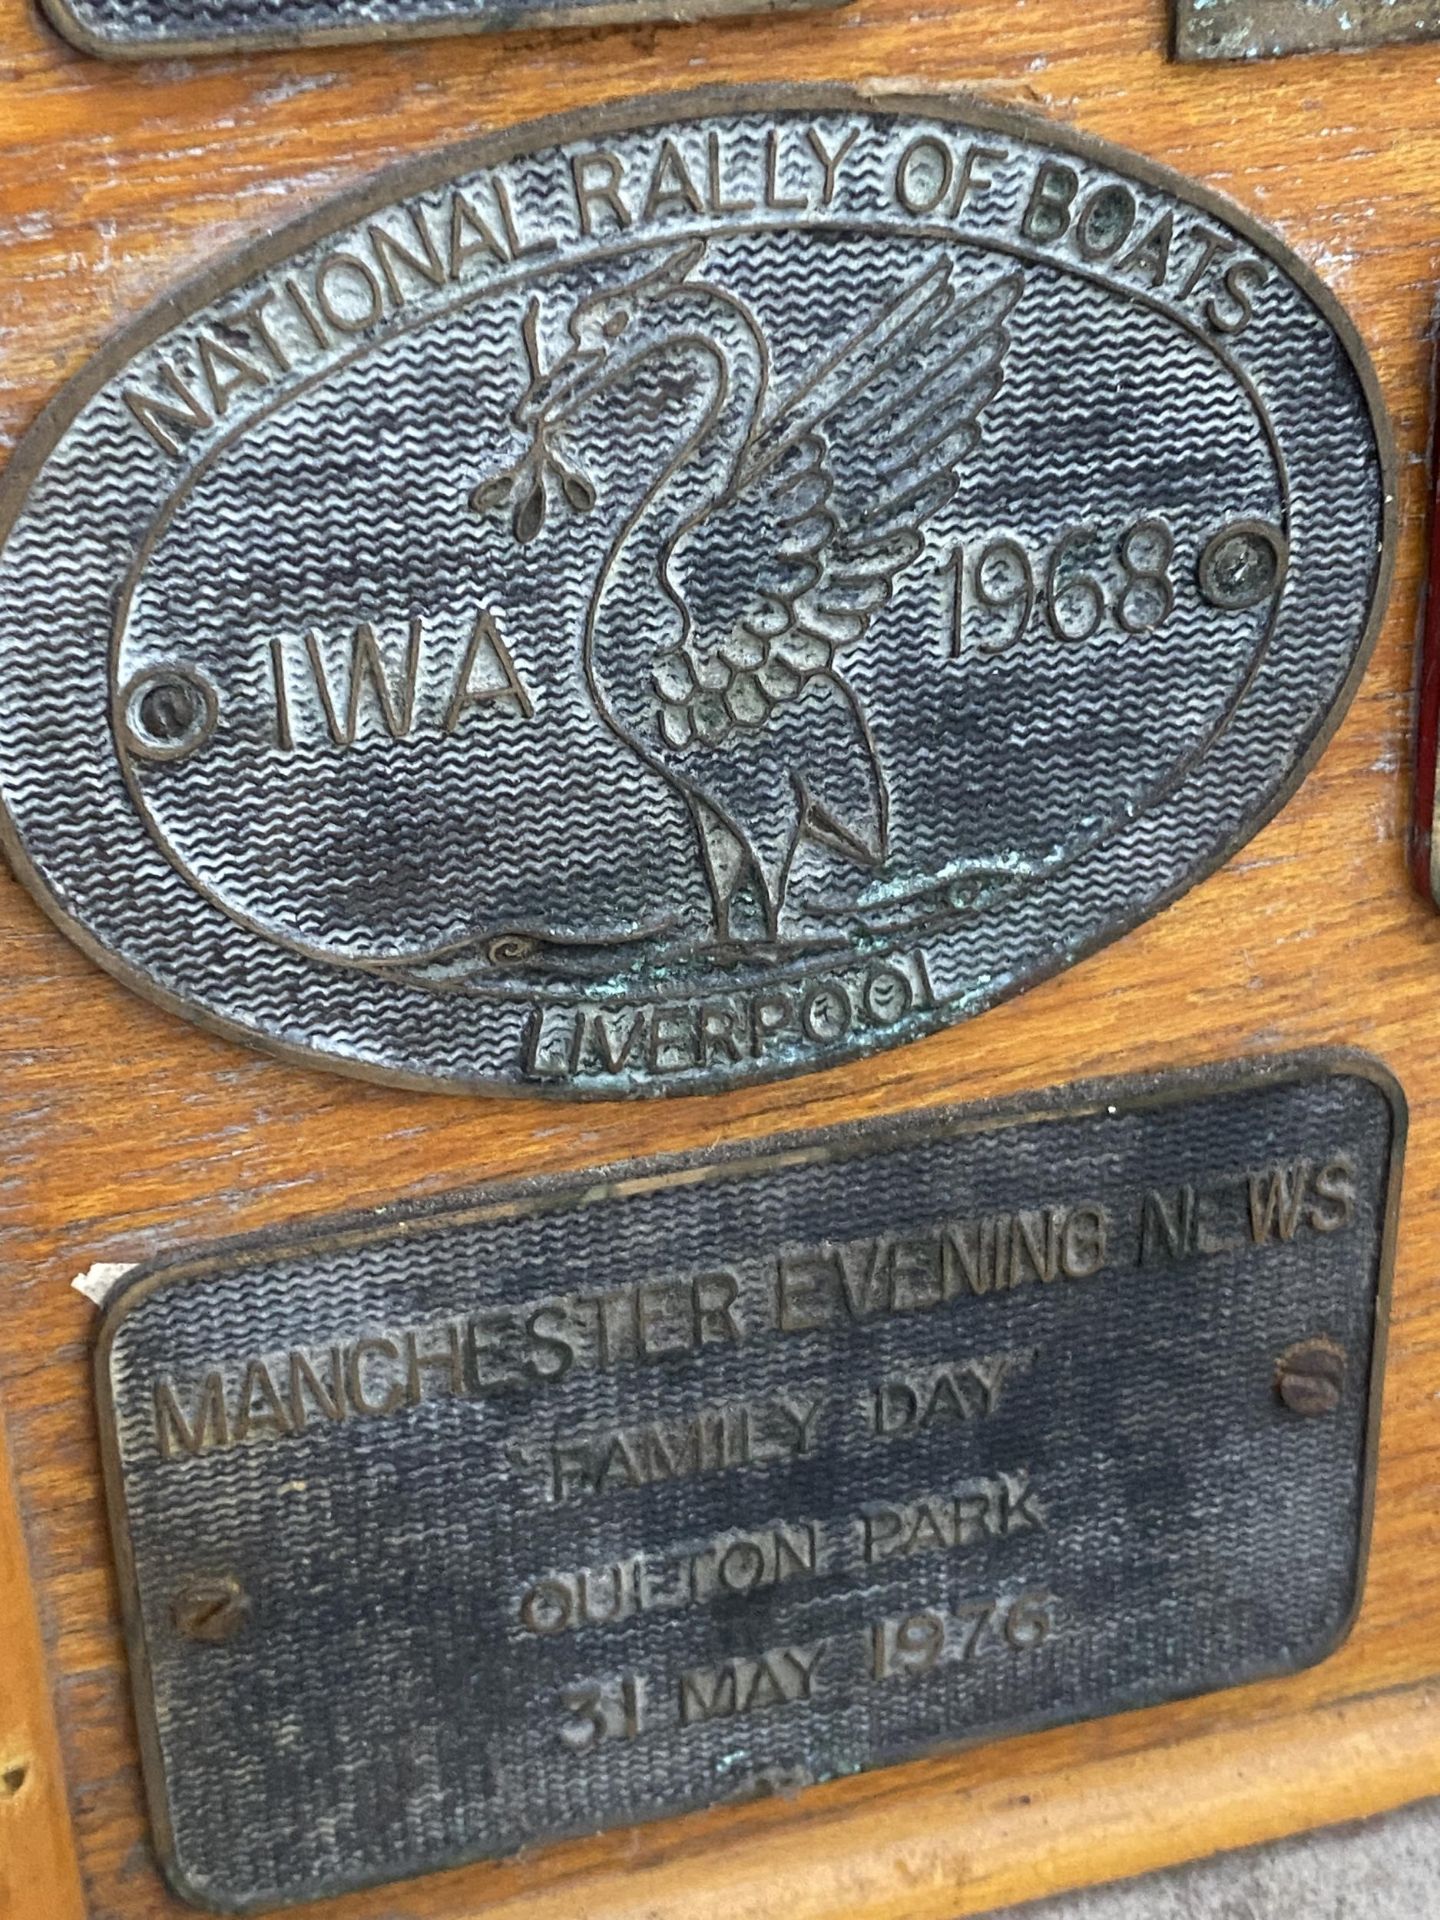 A WOODEN BOARD DISPLAYING A LARGE QUANTITY OF COMMEMERATIVE BRASS PLAQUES FROM VARIOUS STEAM RALLIES - Image 7 of 10